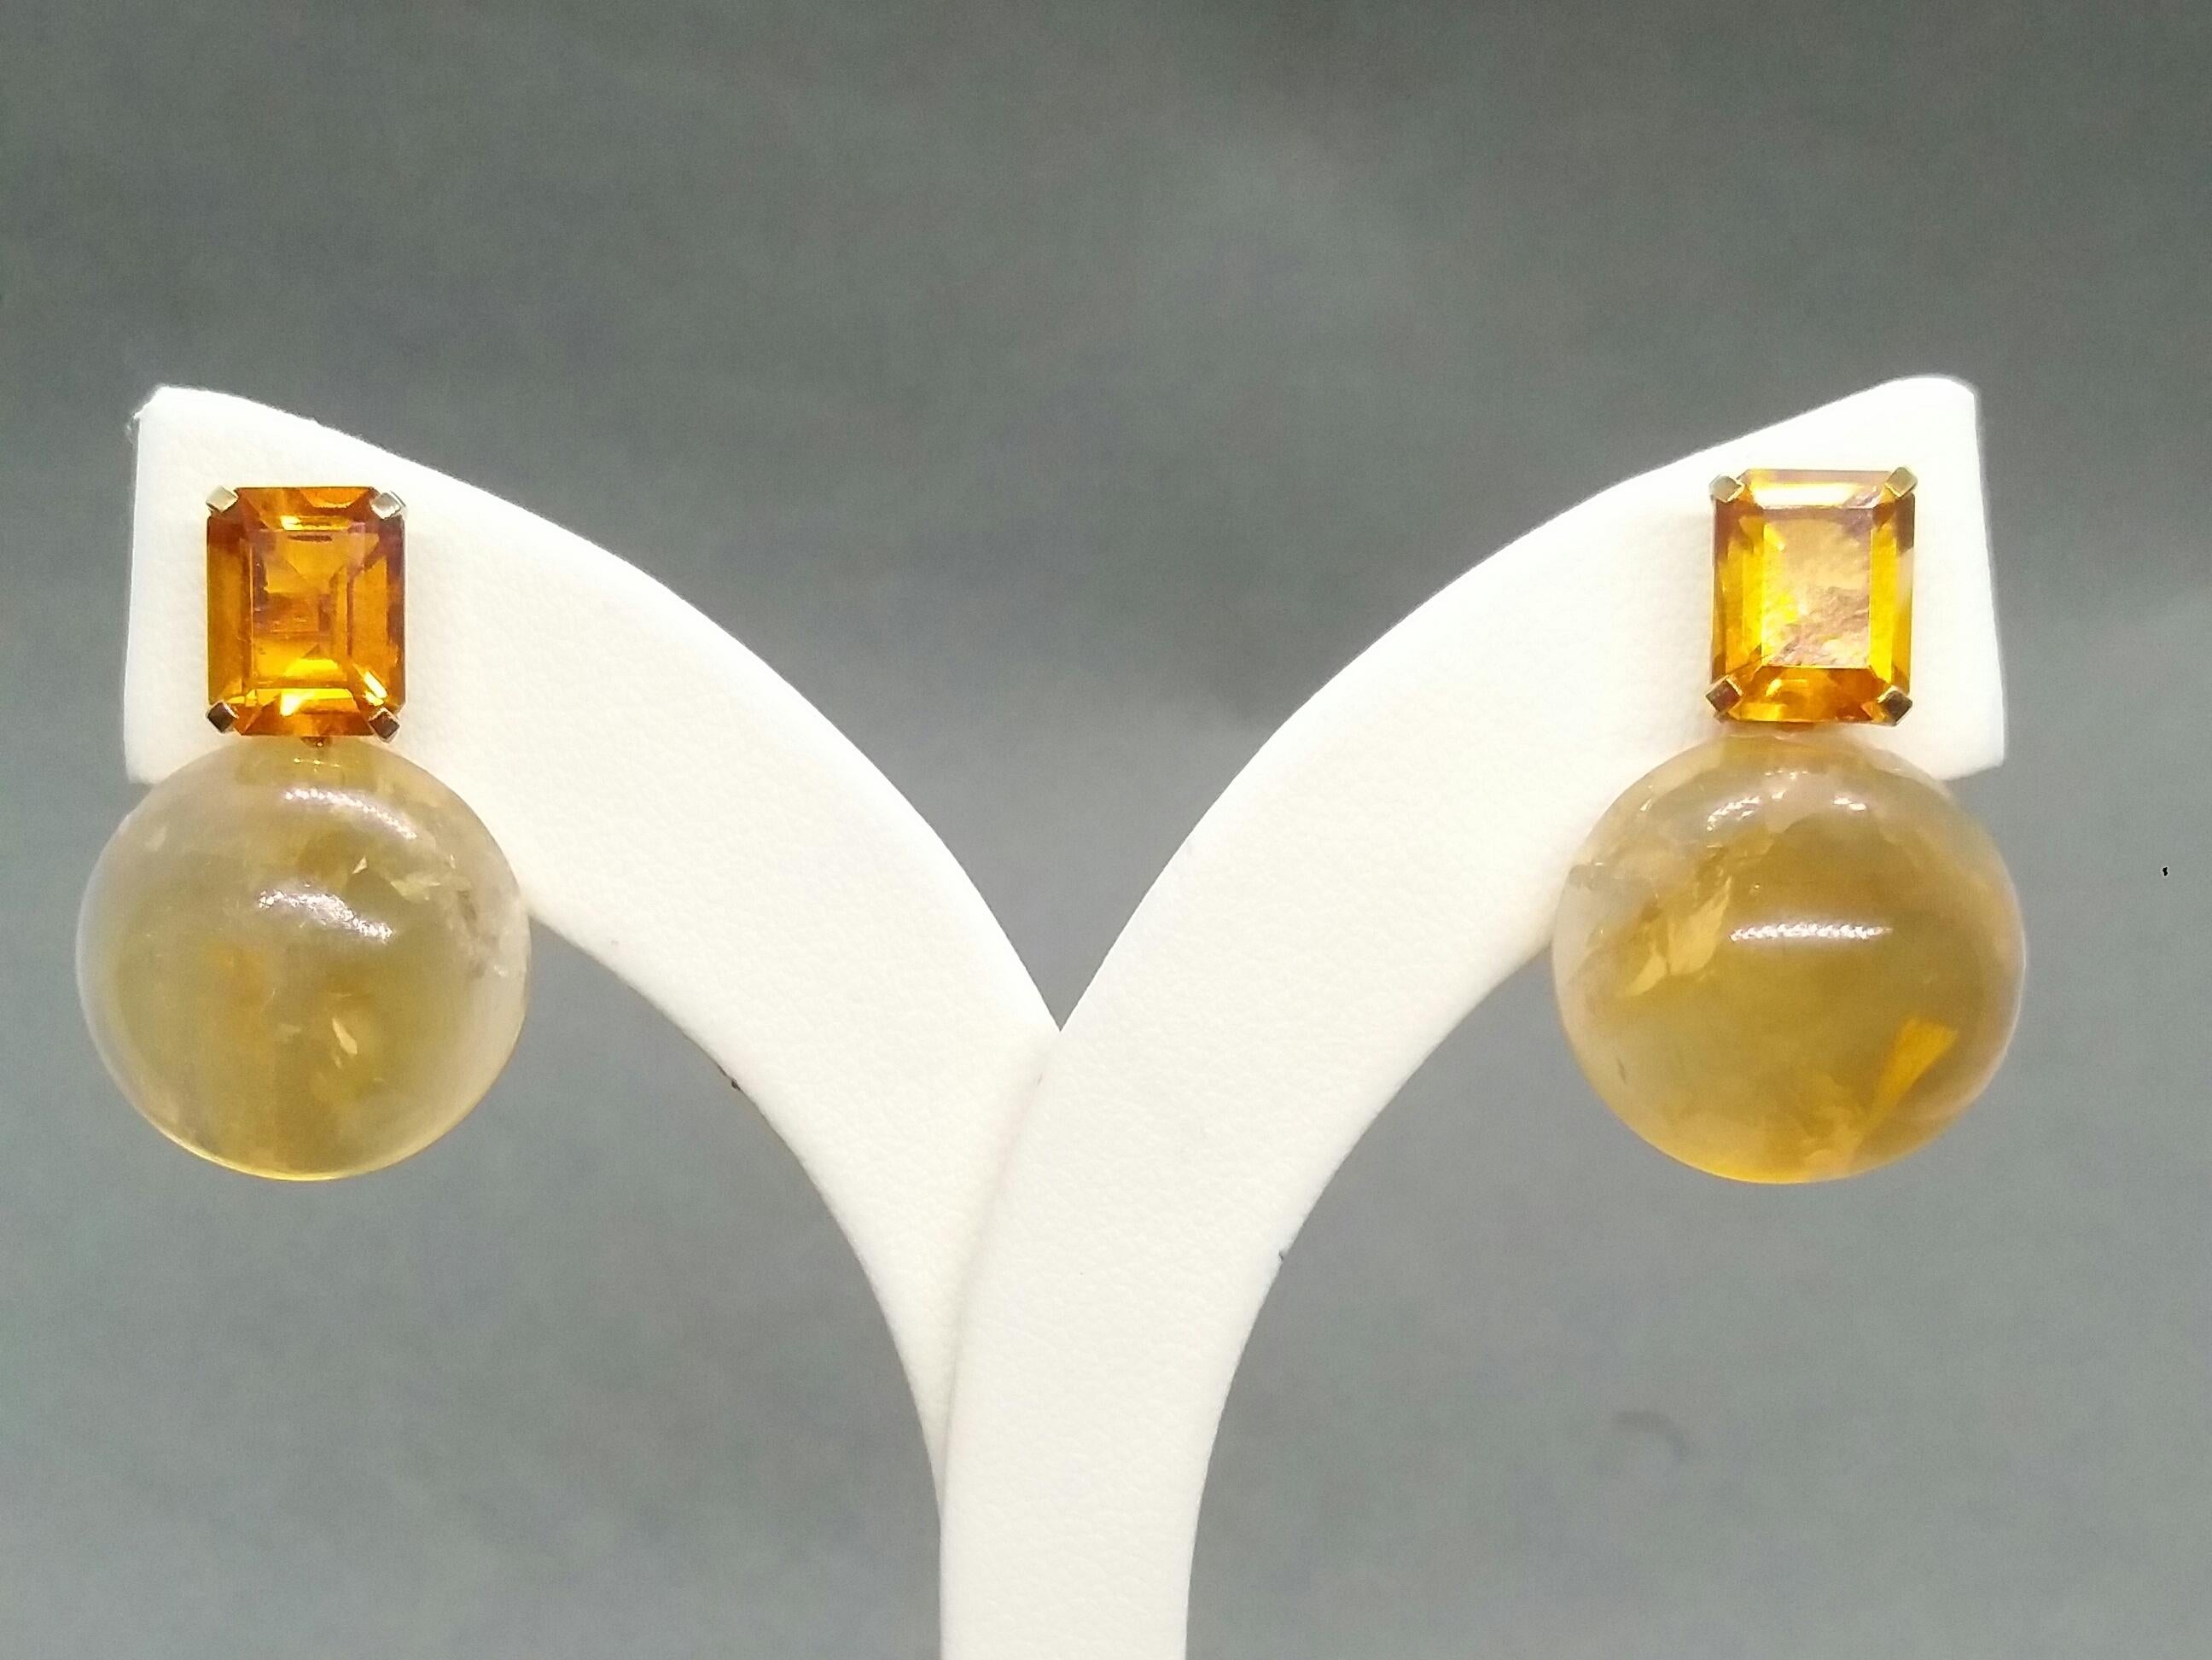 Octagon Cut Faceted Cognac Citrine Golden Citrine Button 14 Kt Solid Yellow Gold For Sale 7